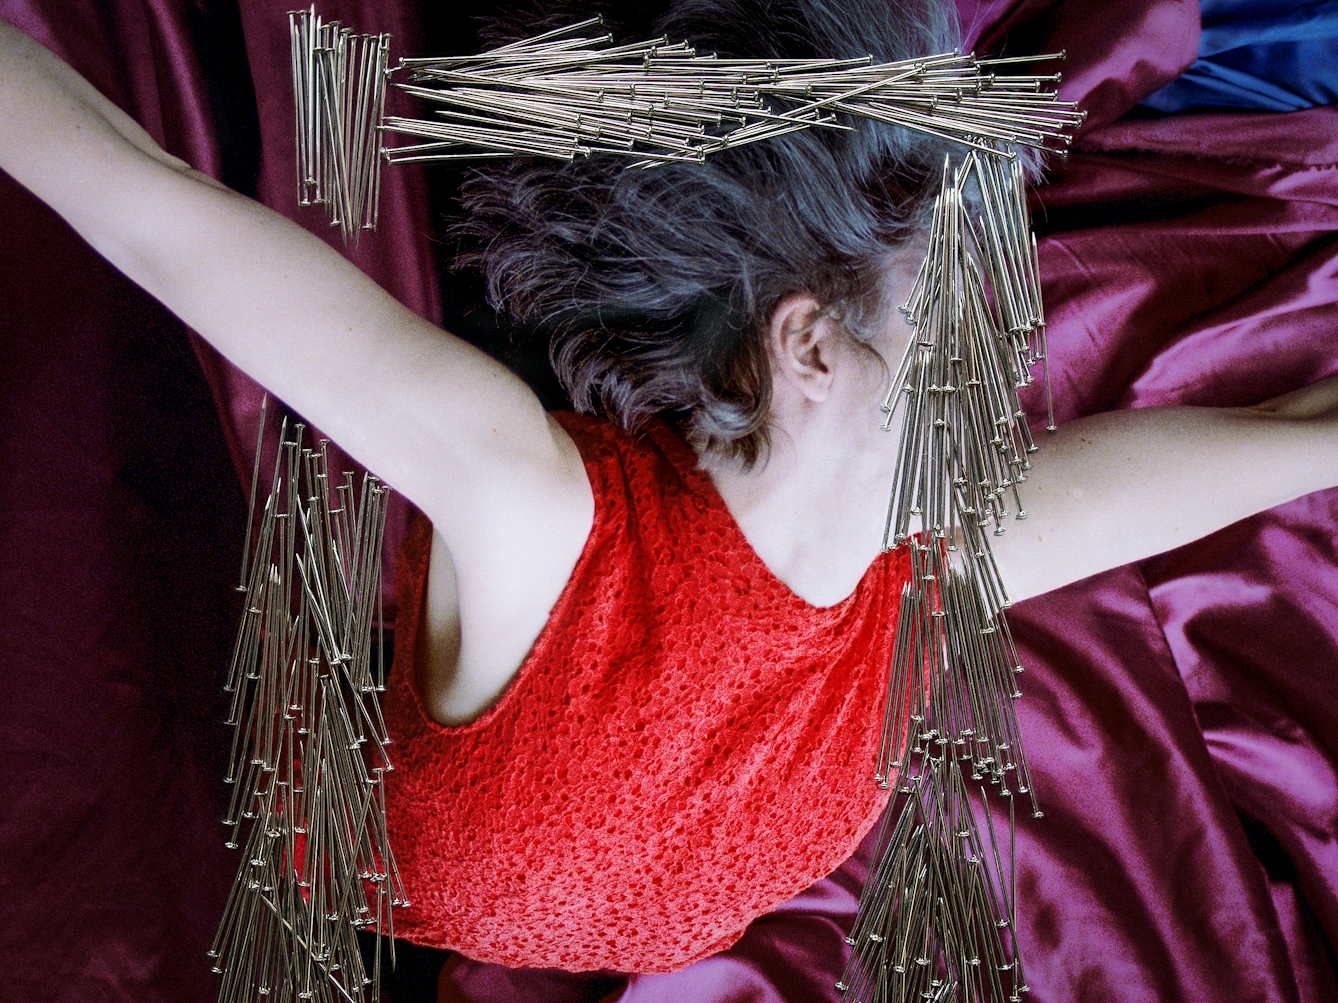 Detail from a larger artwork created with a colour photographic print of a female figure in a bright red dress, set against a purple and blue draped silk background. The figure is viewed as if from above her looking down. Her arms are extended out to the side. Her body is covered by groups of dress pins, laid on top of the photographic print. The pins are arranged in a square frame shape in the centre of the print. One side of this frame covers her face. Another side of the pin frame stops above and below her extended arm making it look as if she is bursting through the frame. 